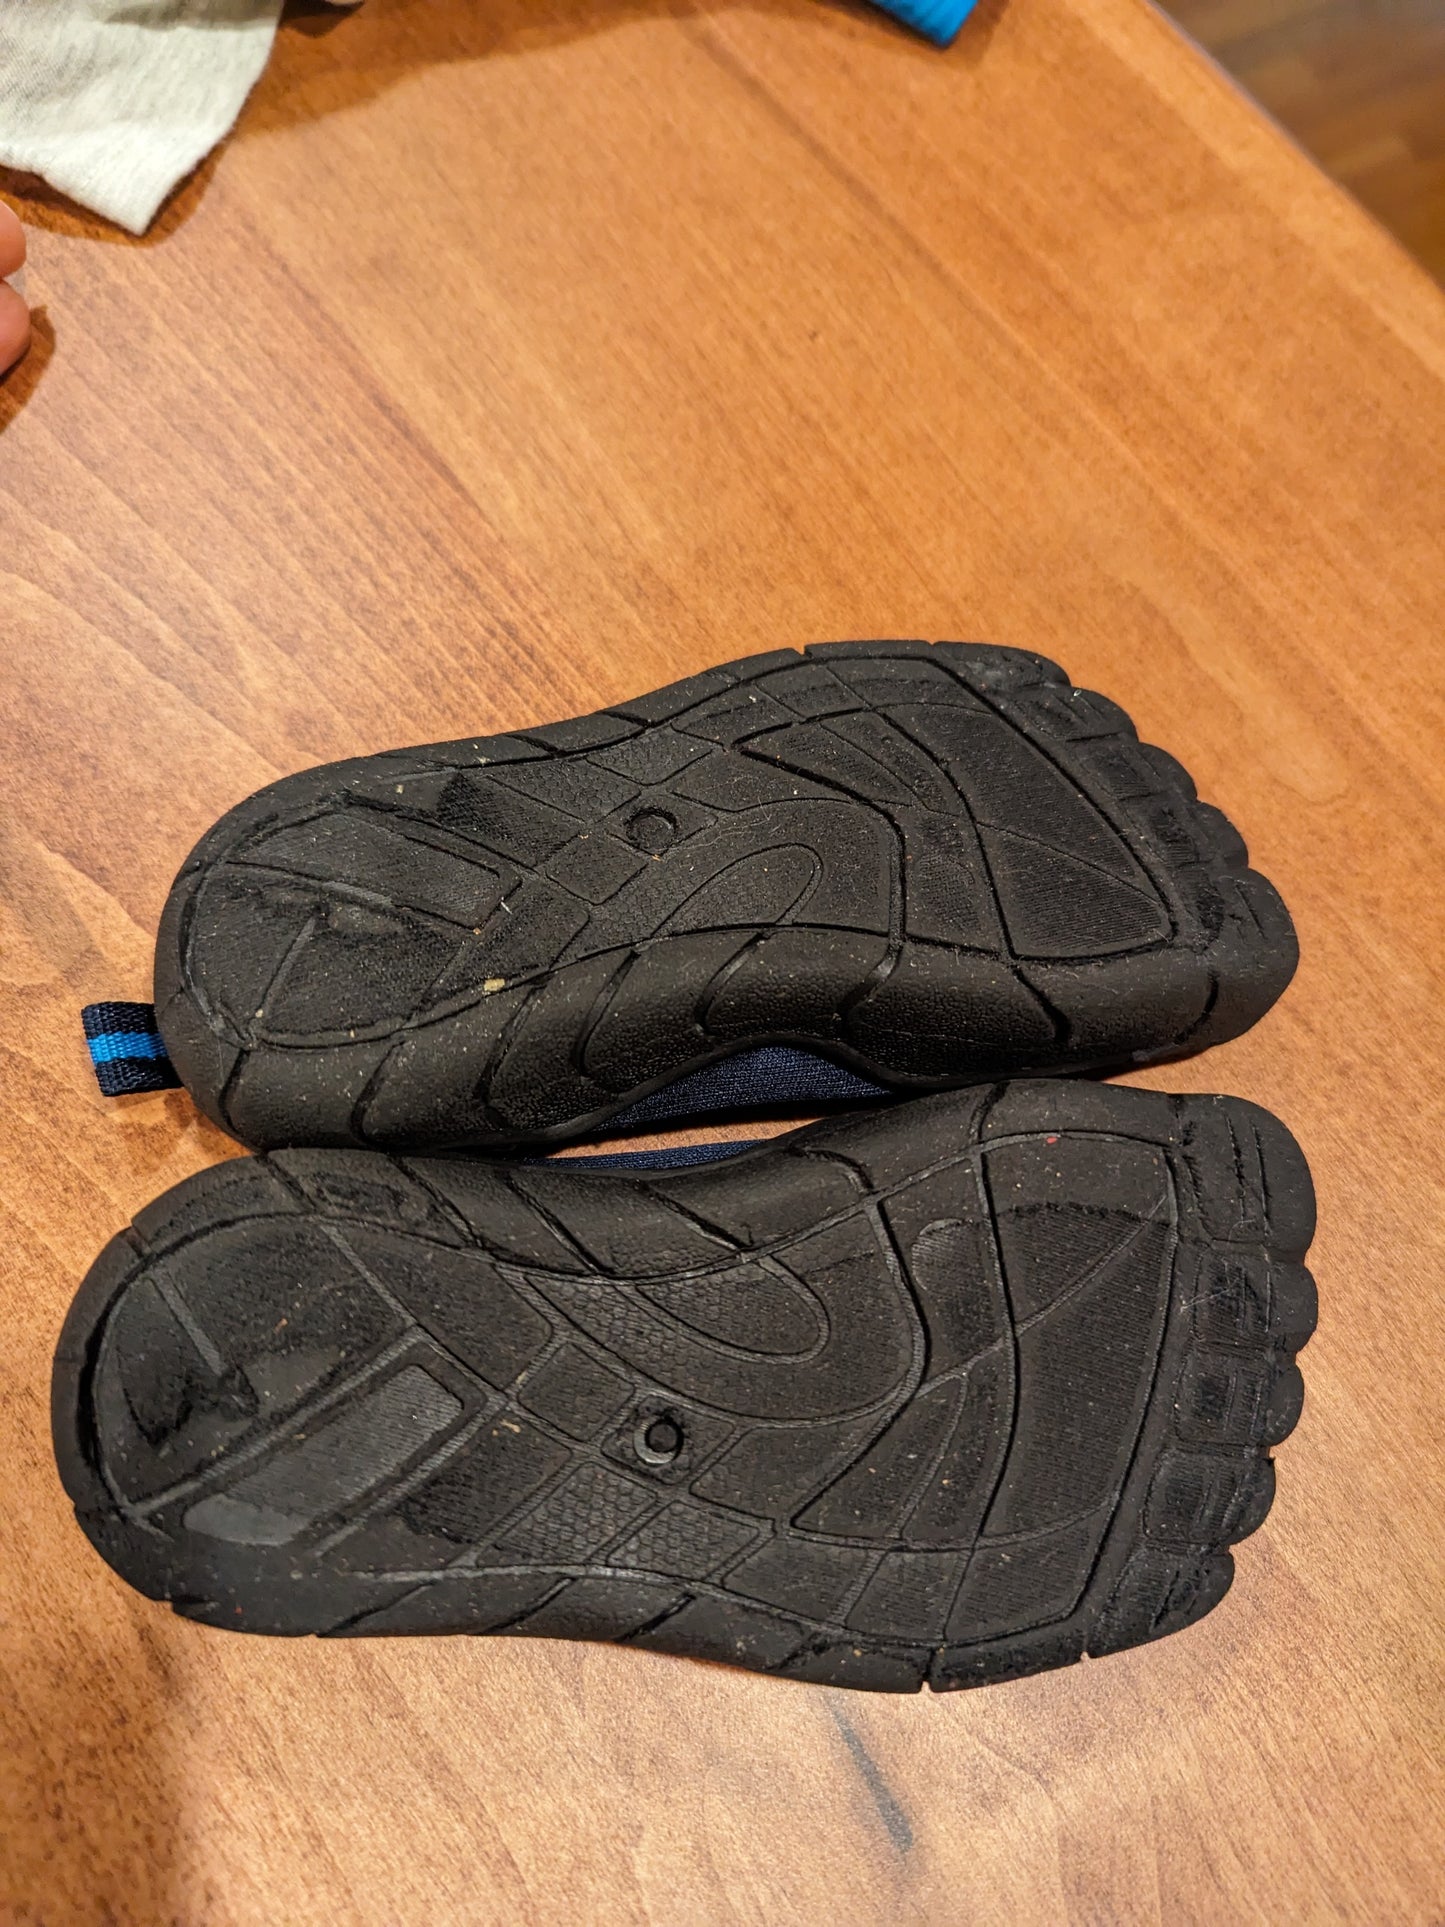 Toddler water shoes - size 7